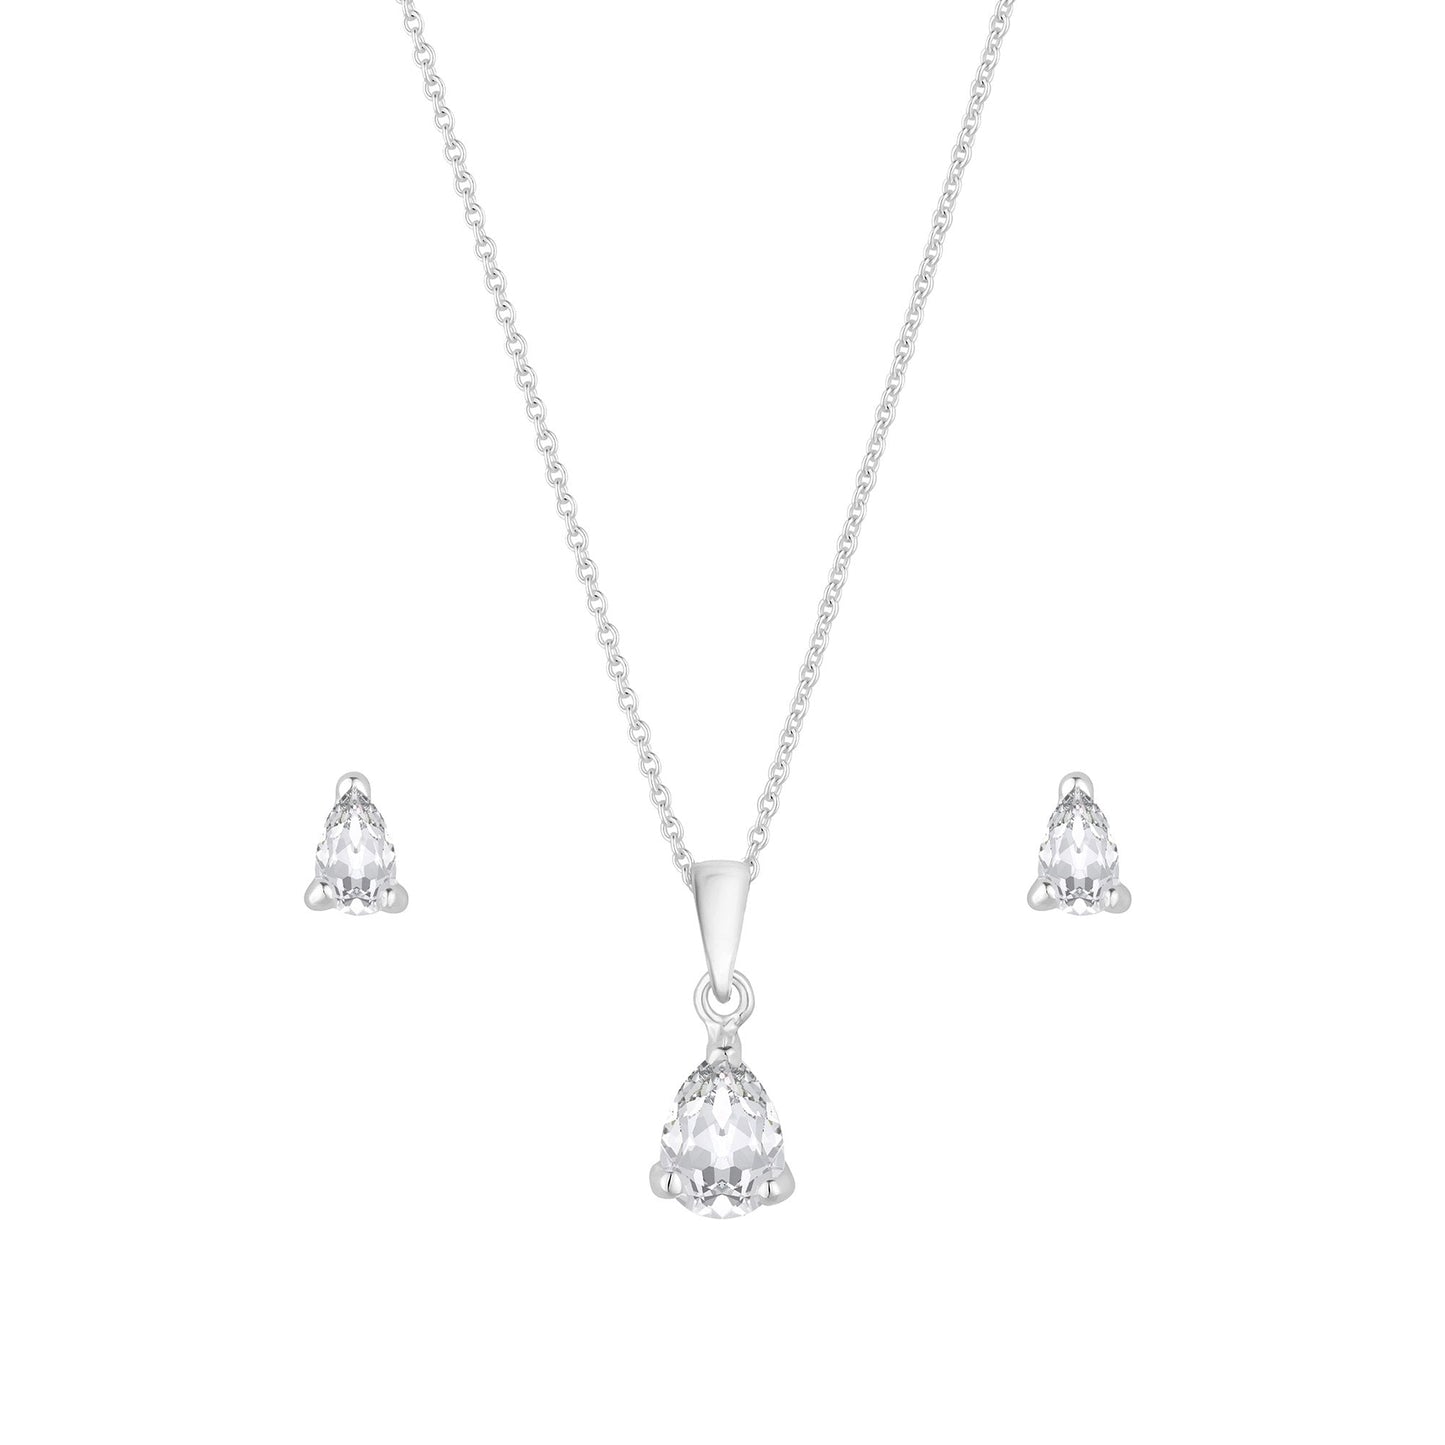 Sterling Silver 925 Cubic Zirconia Pear Stone Set